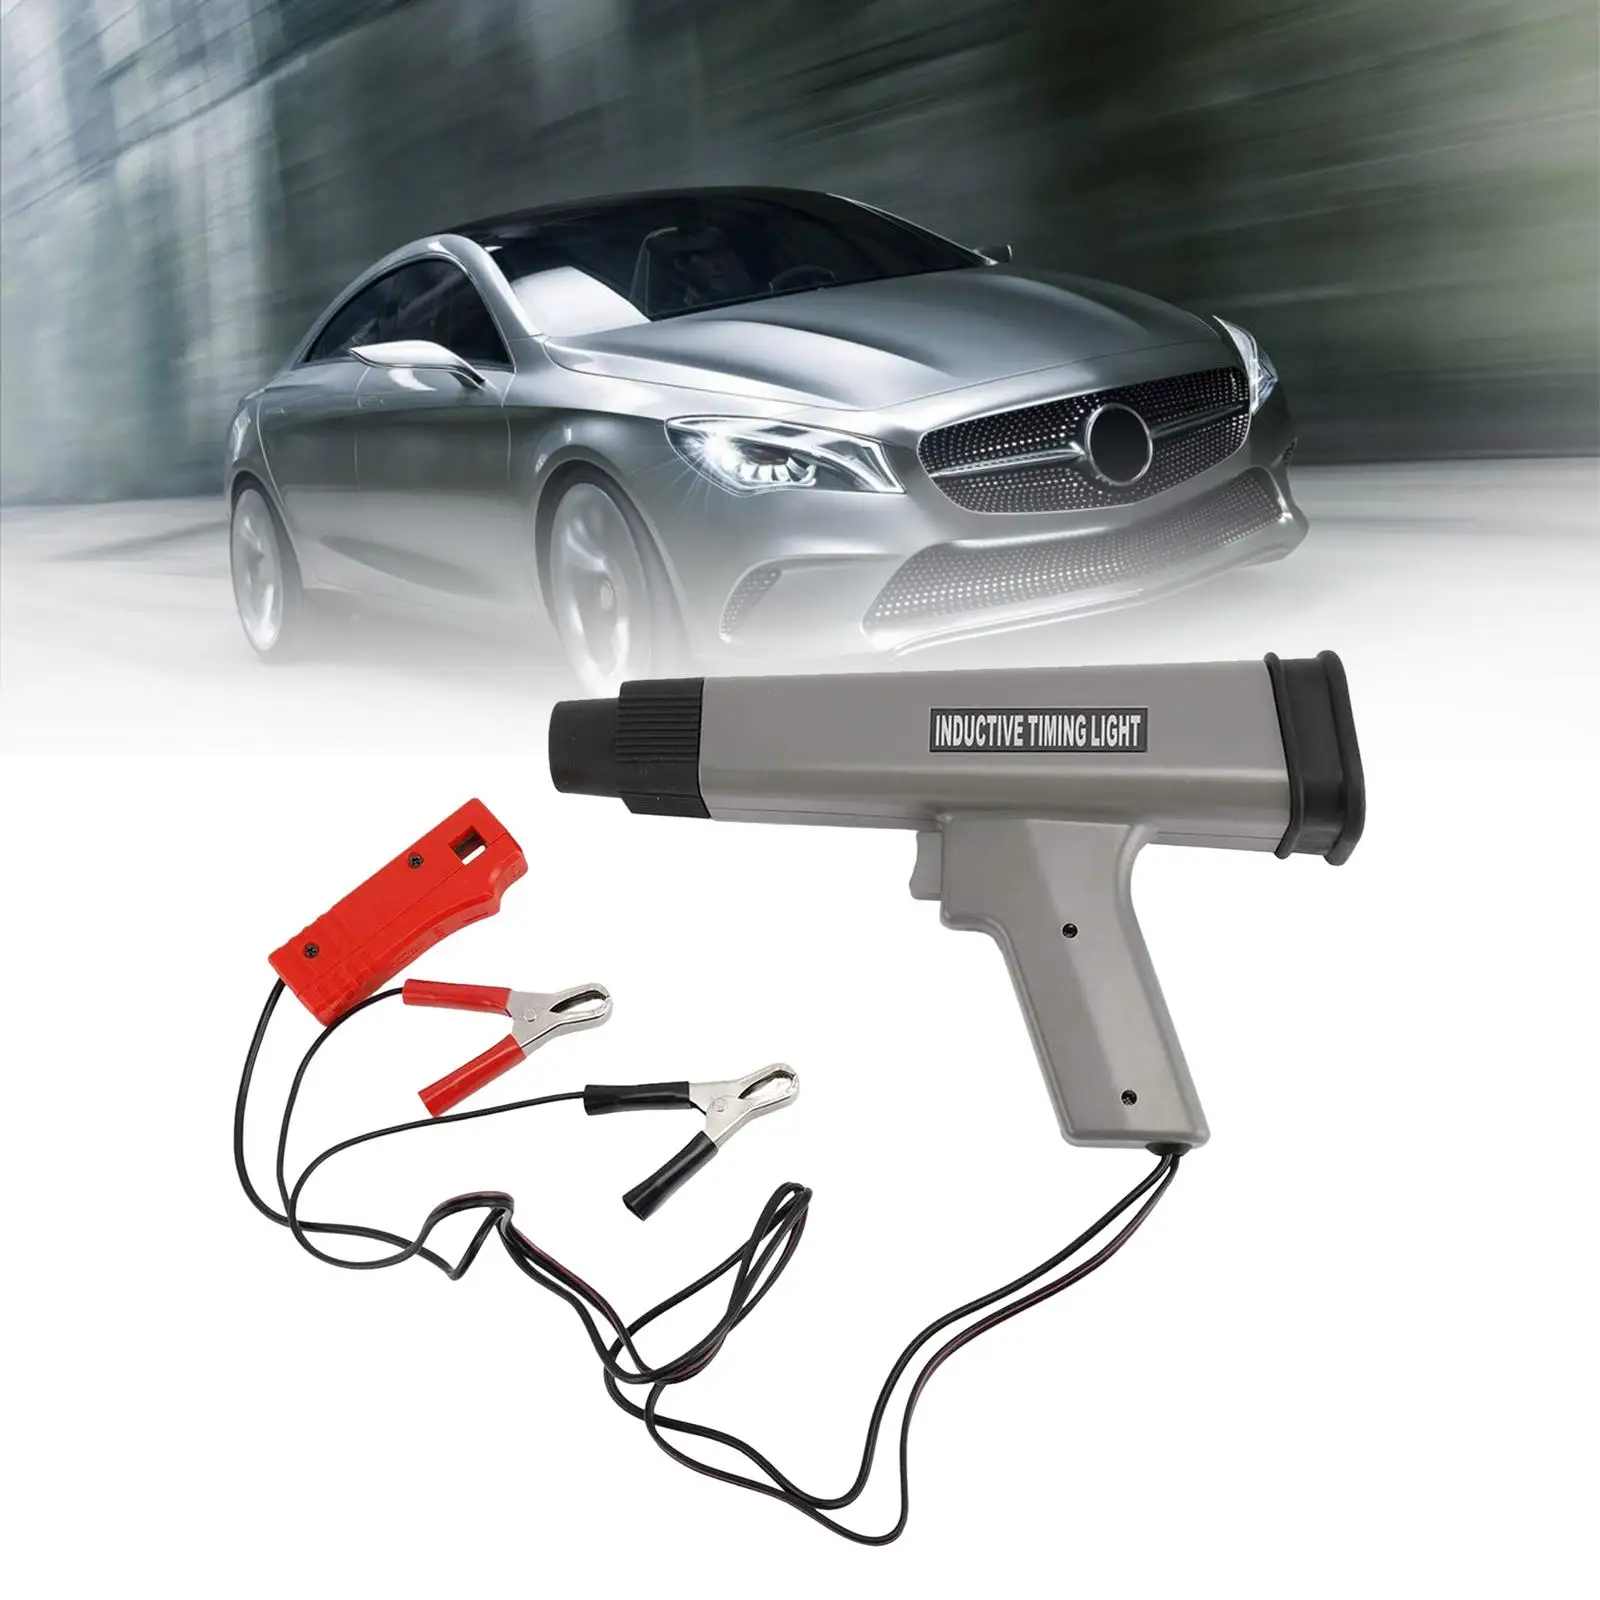 Advance Timing Light Automotive Tool 8000RPM High Performance Easy Installation Ignition Timing Light for Car Vehicle